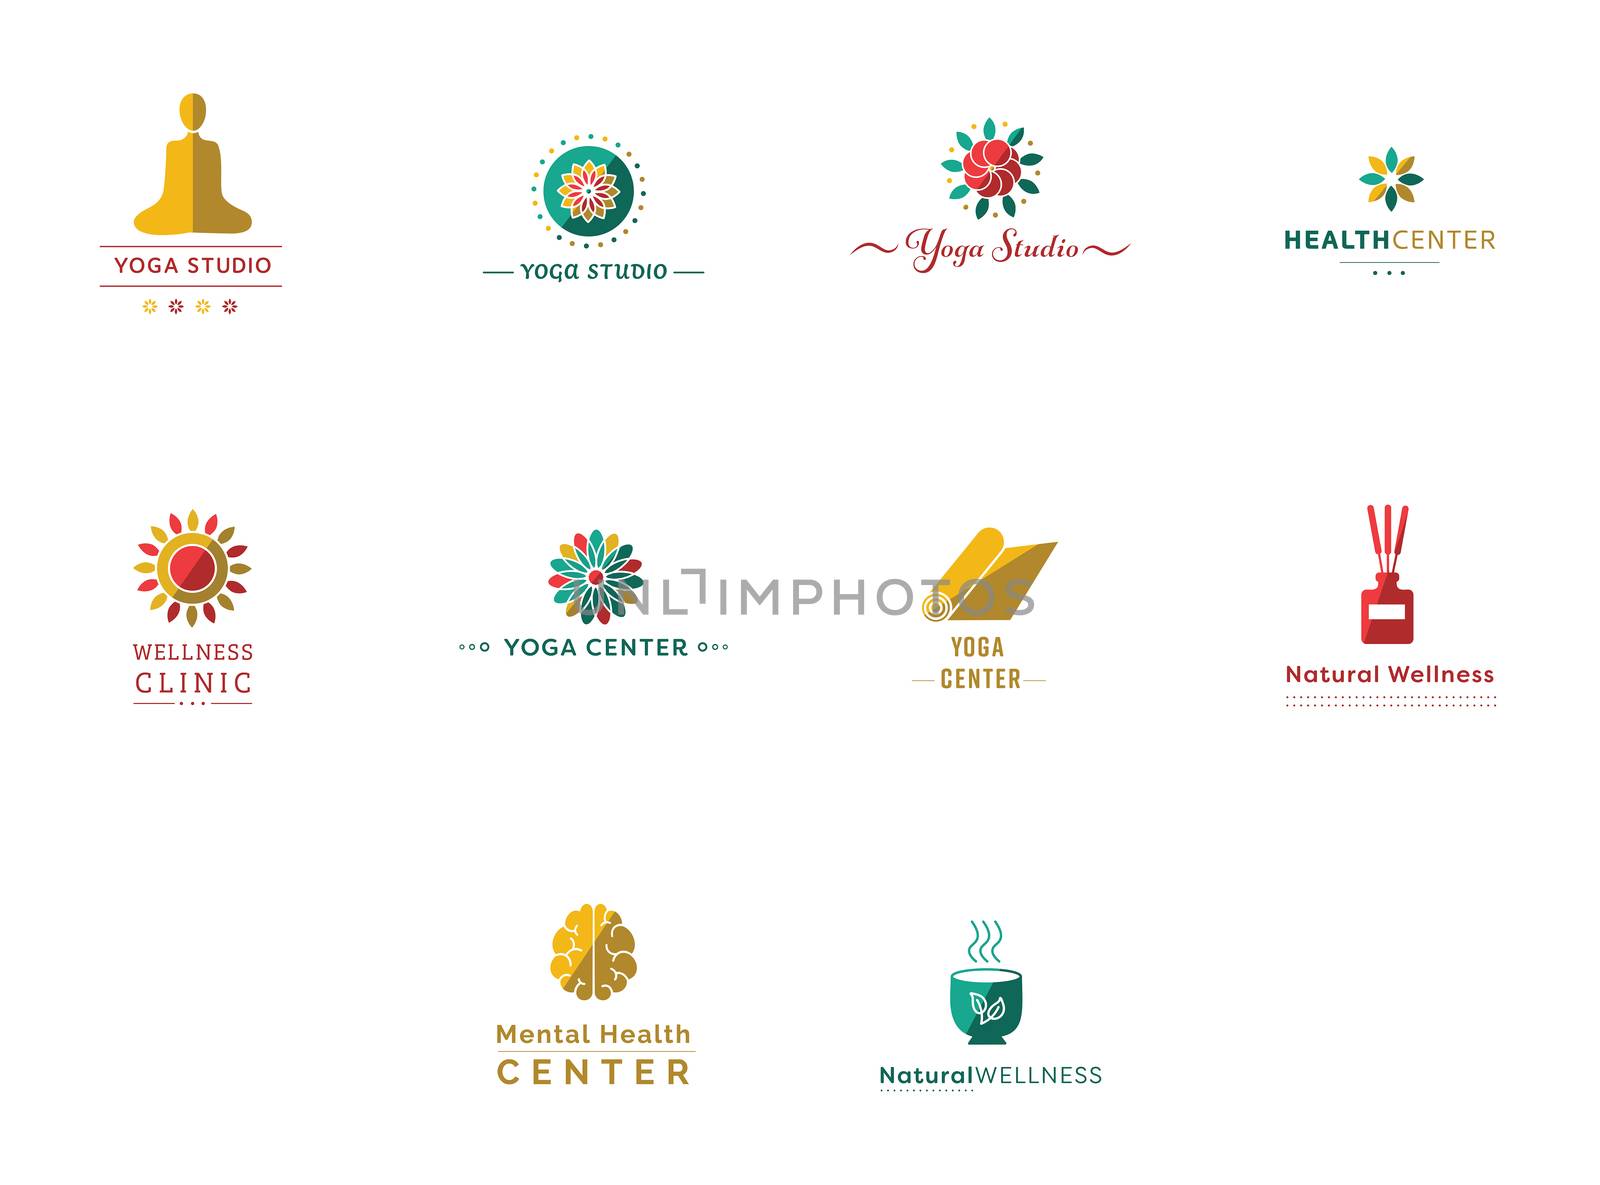 Various vectors icons of yoga and fitness centers by Wavebreakmedia